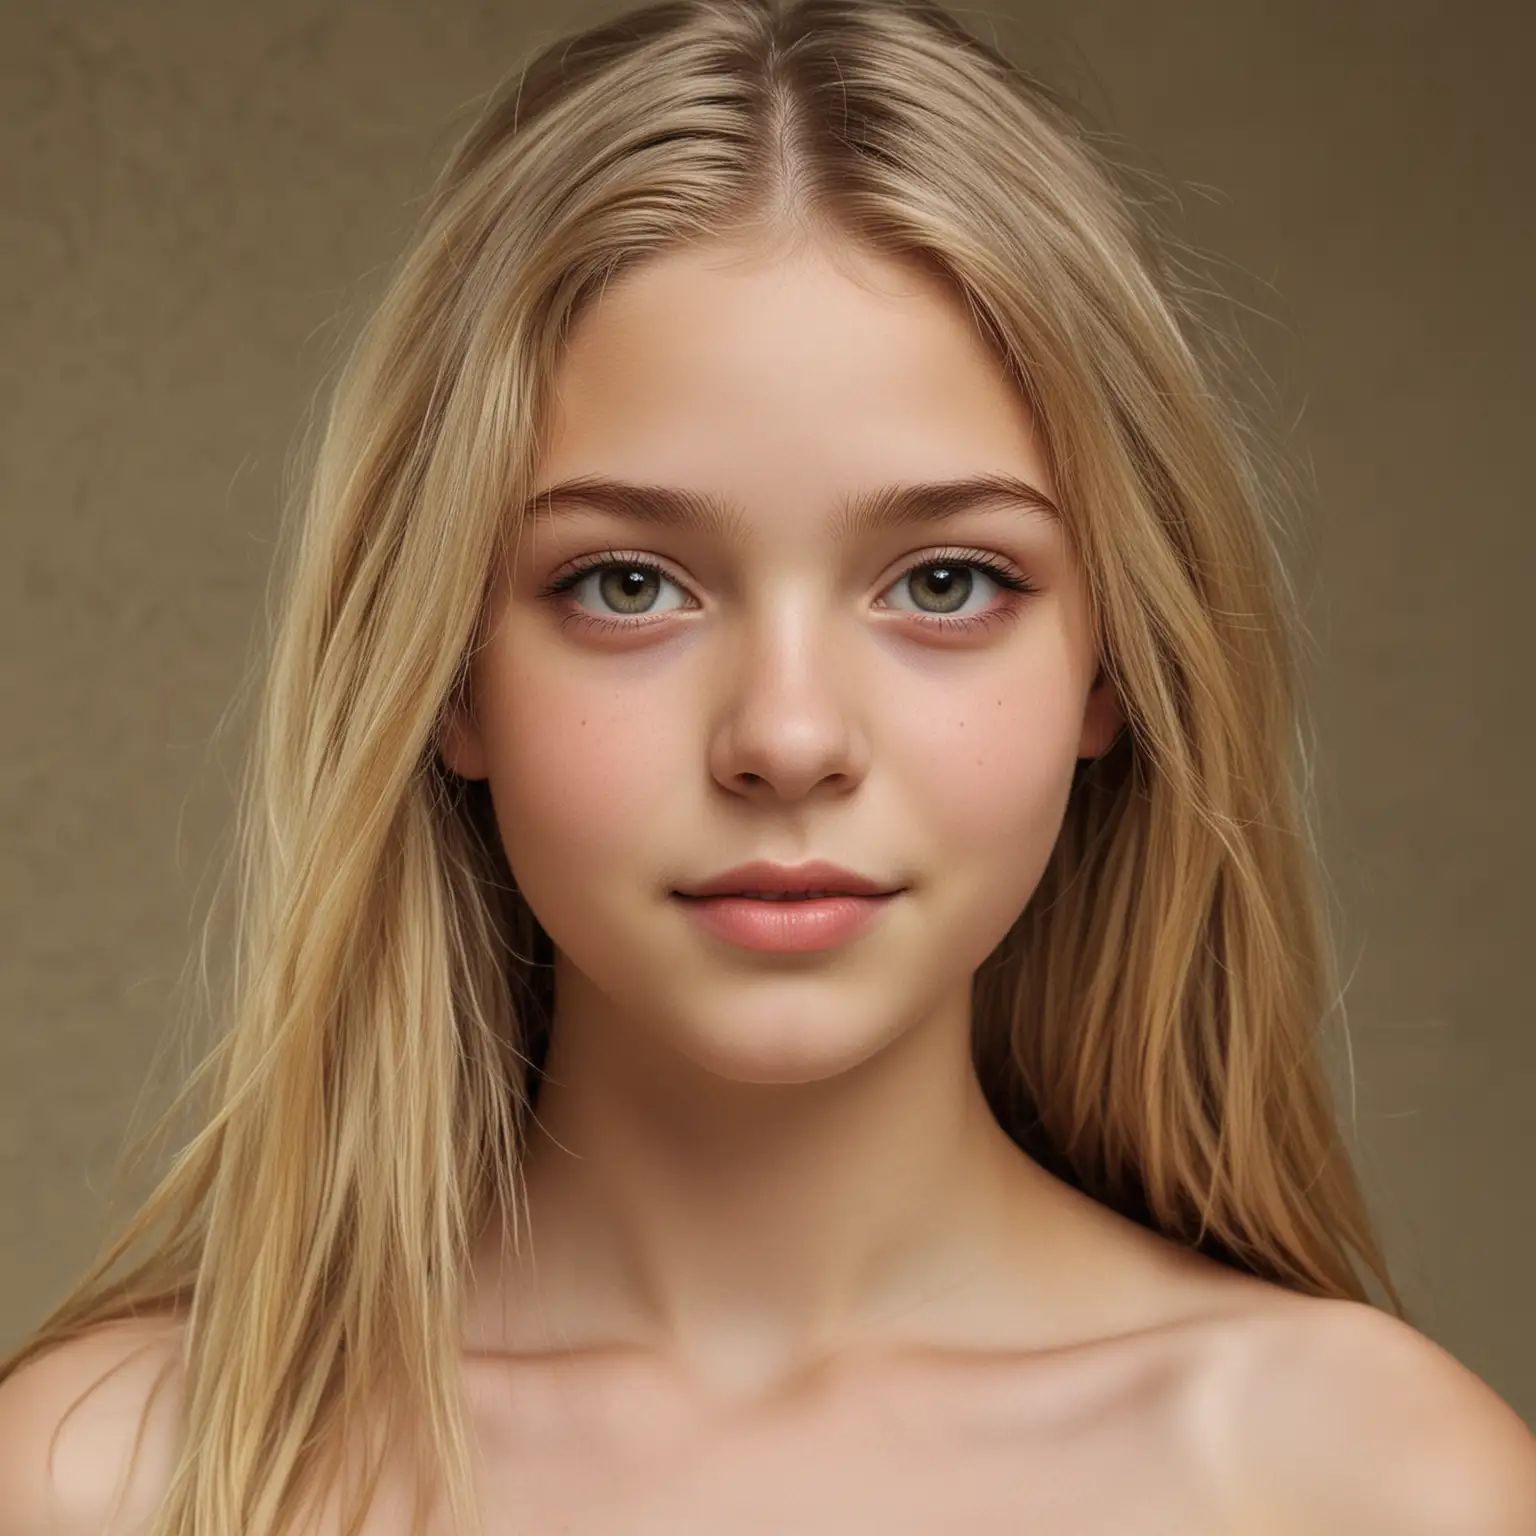 Teen Model Maisie de Krassel Ethereal Head and Torso Portrait with Loving Smile